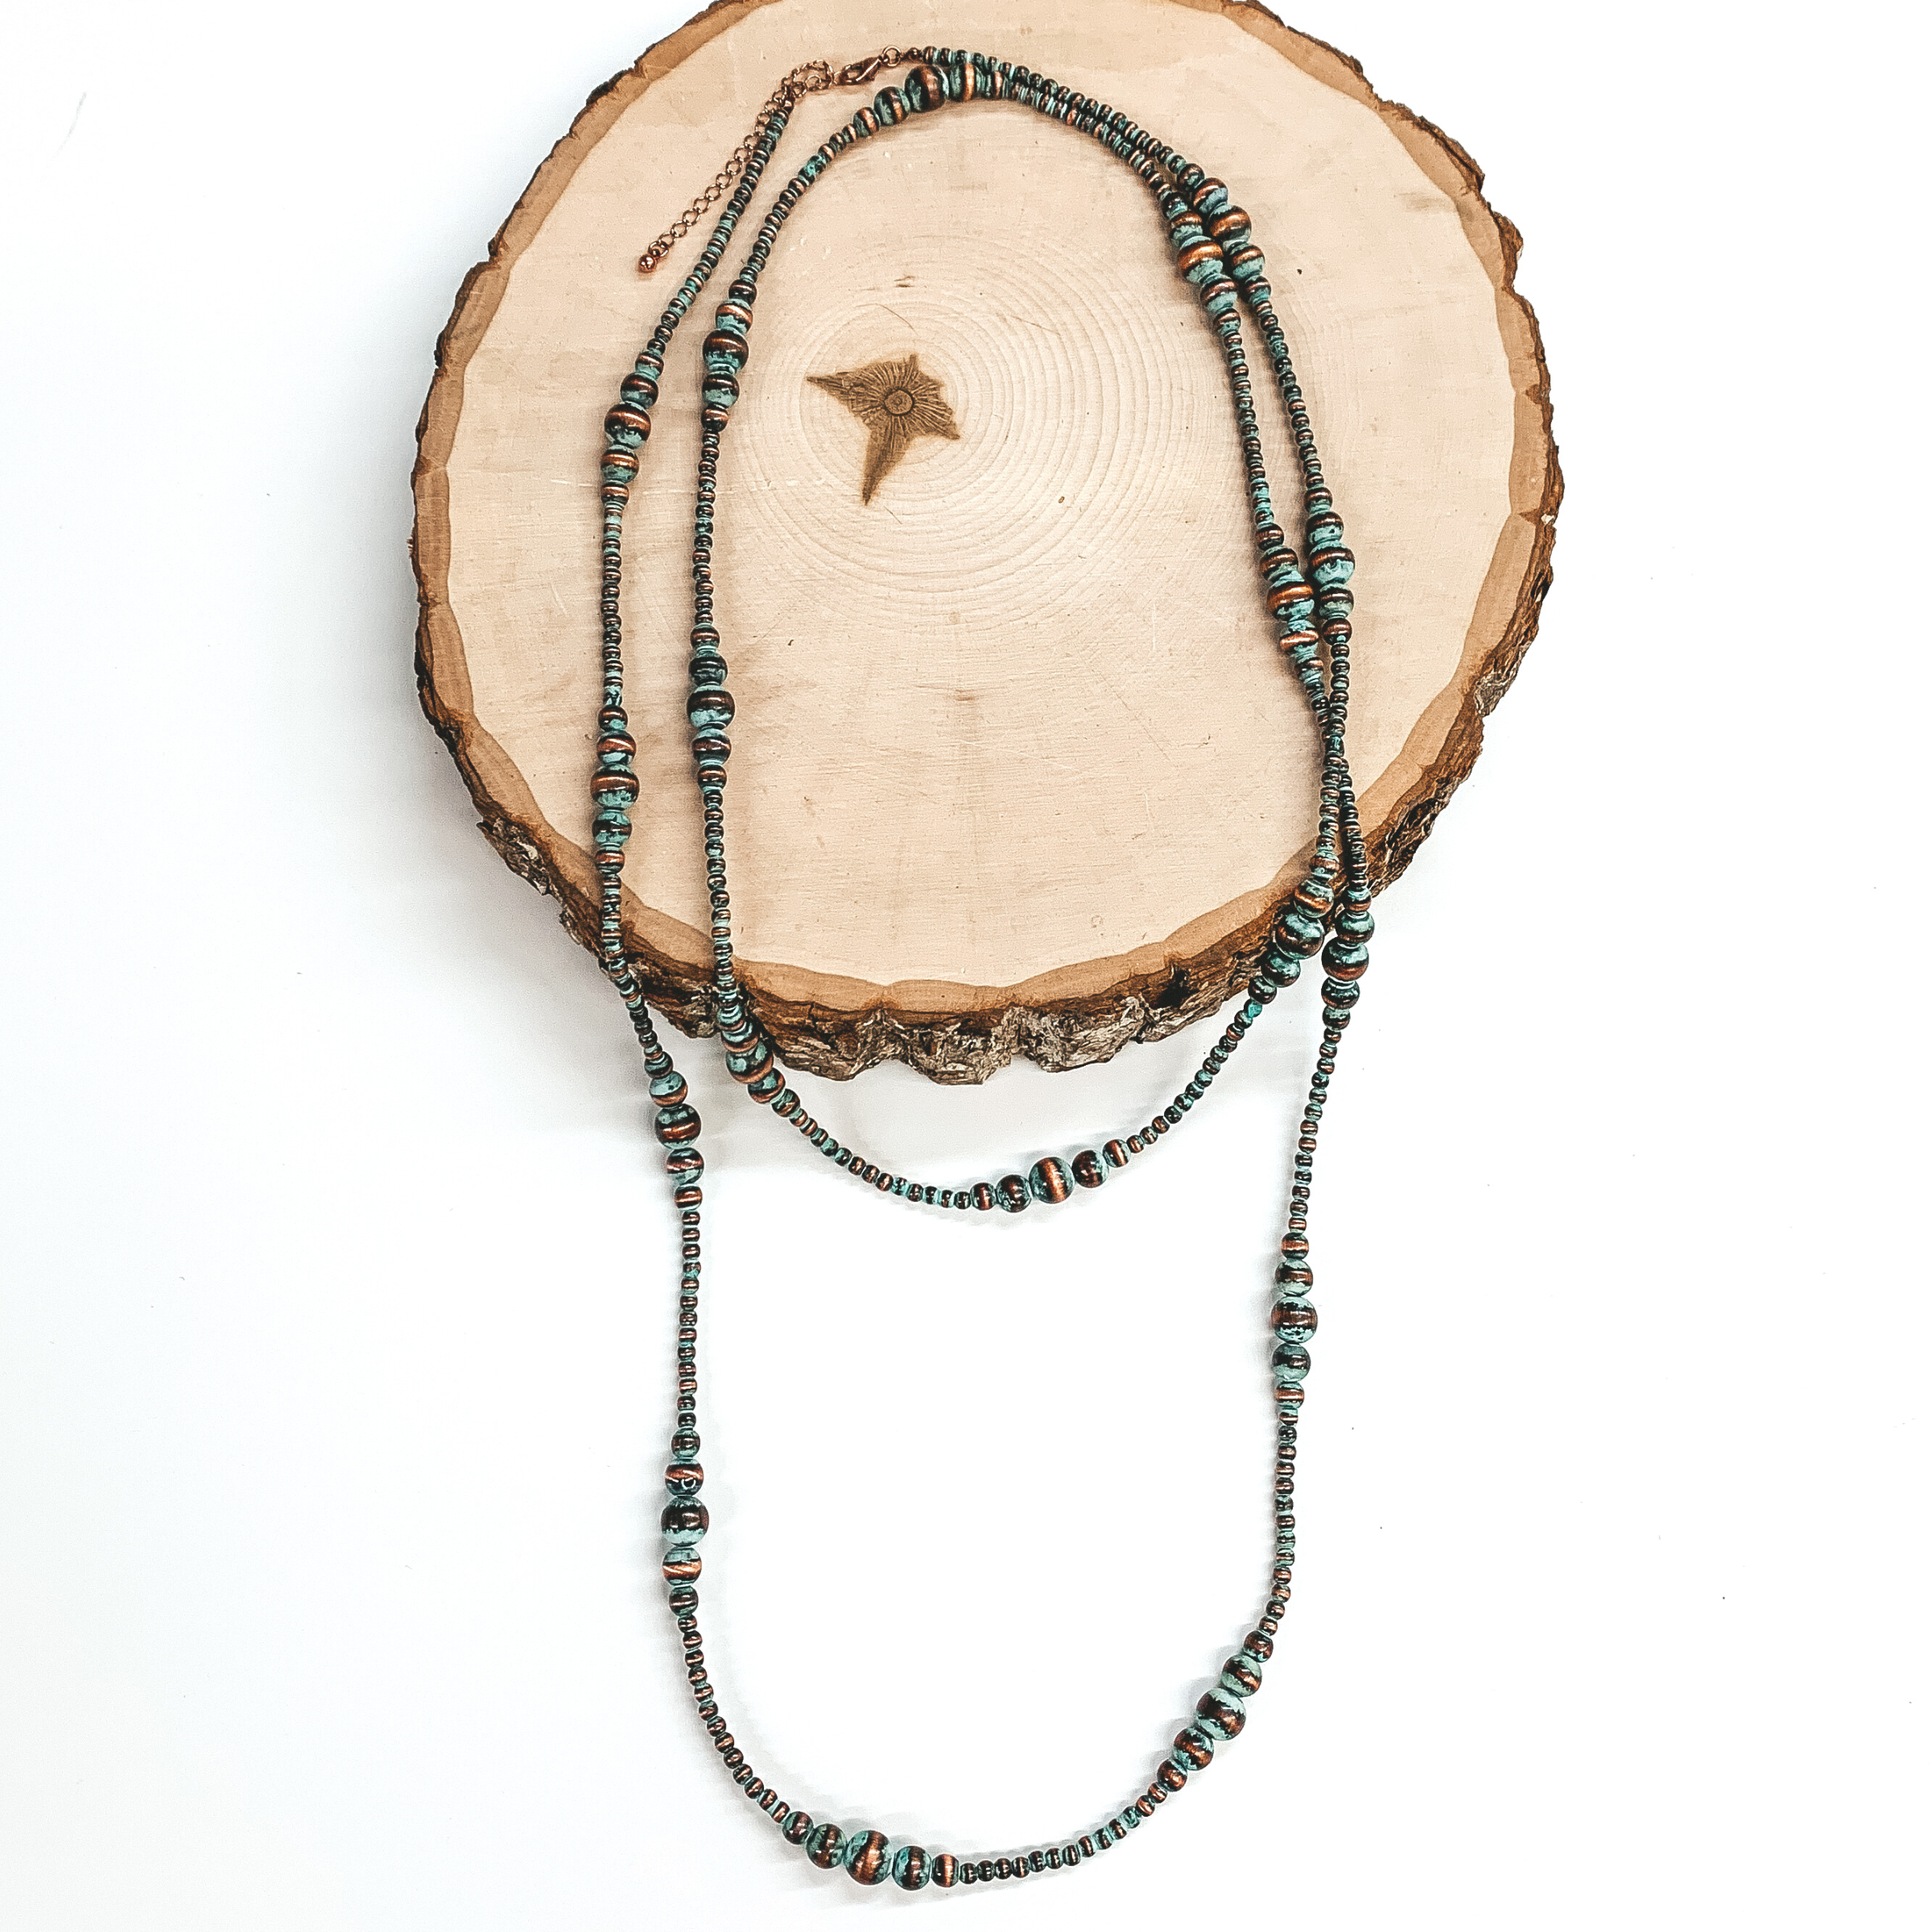 Faux Navajo Graduated Pearl Necklace in Patina Tone - Giddy Up Glamour Boutique